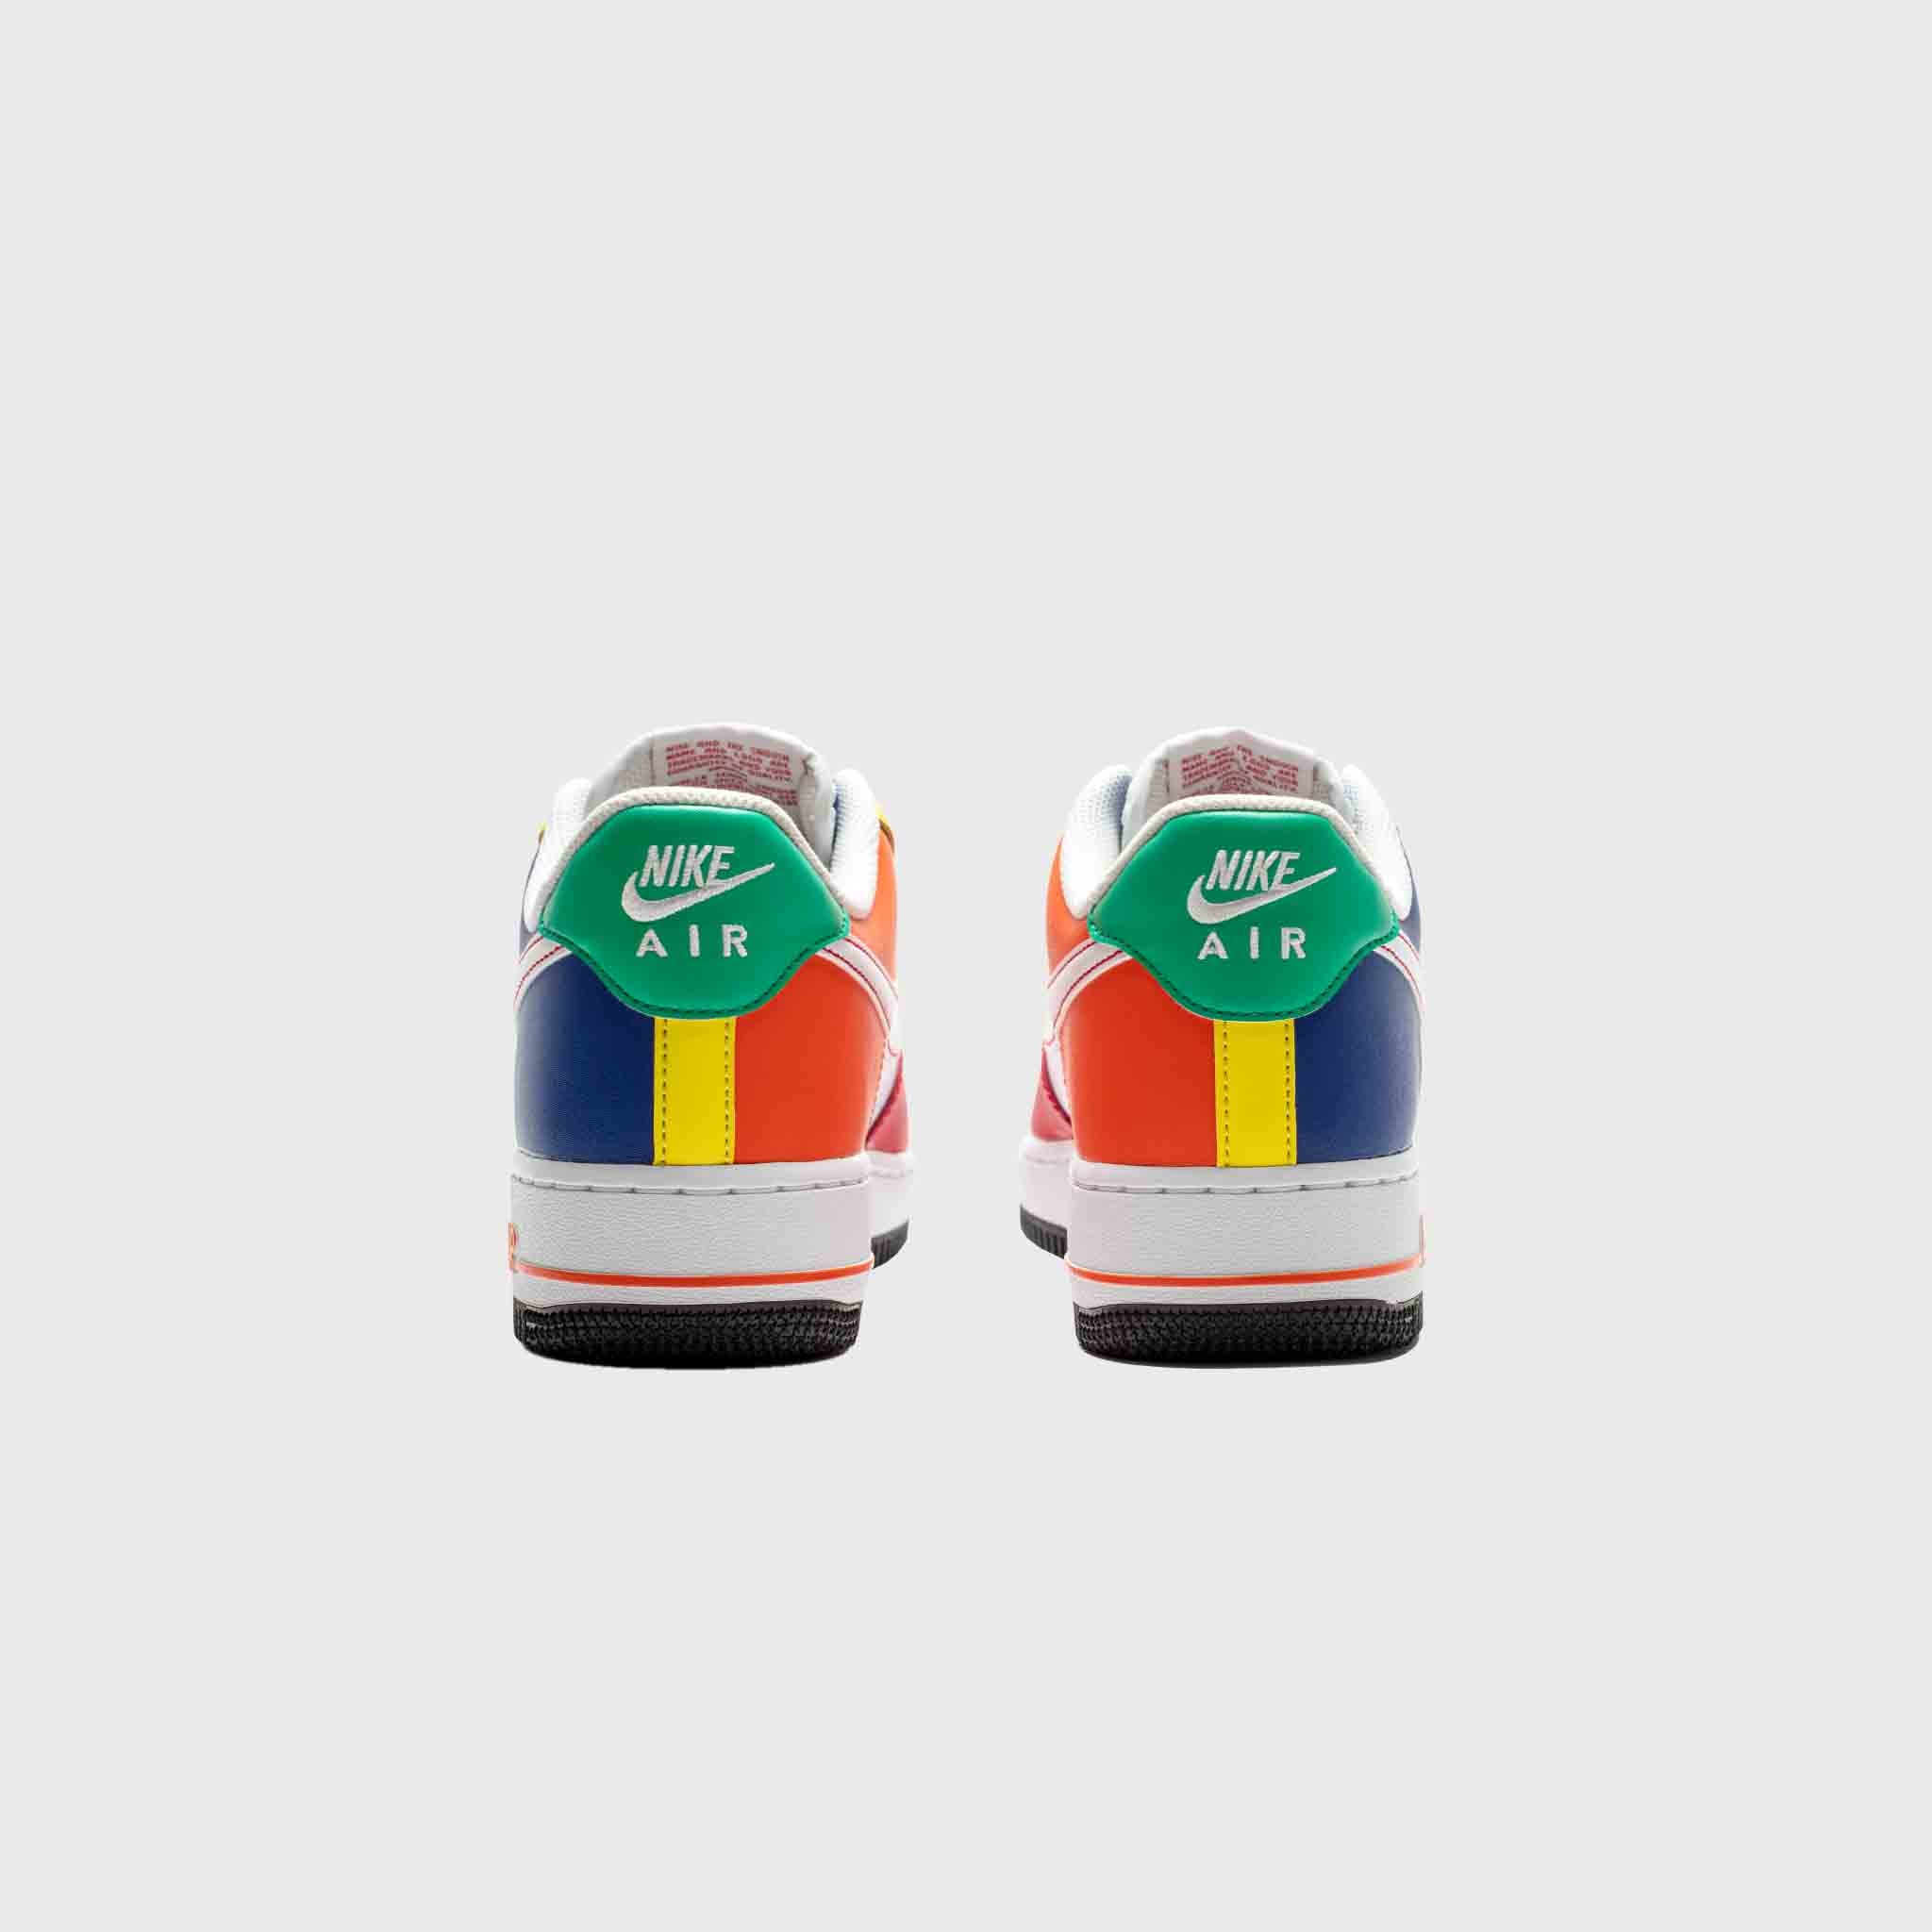 AIR FORCE 1 '07 LV8 "MULTICOLOR"